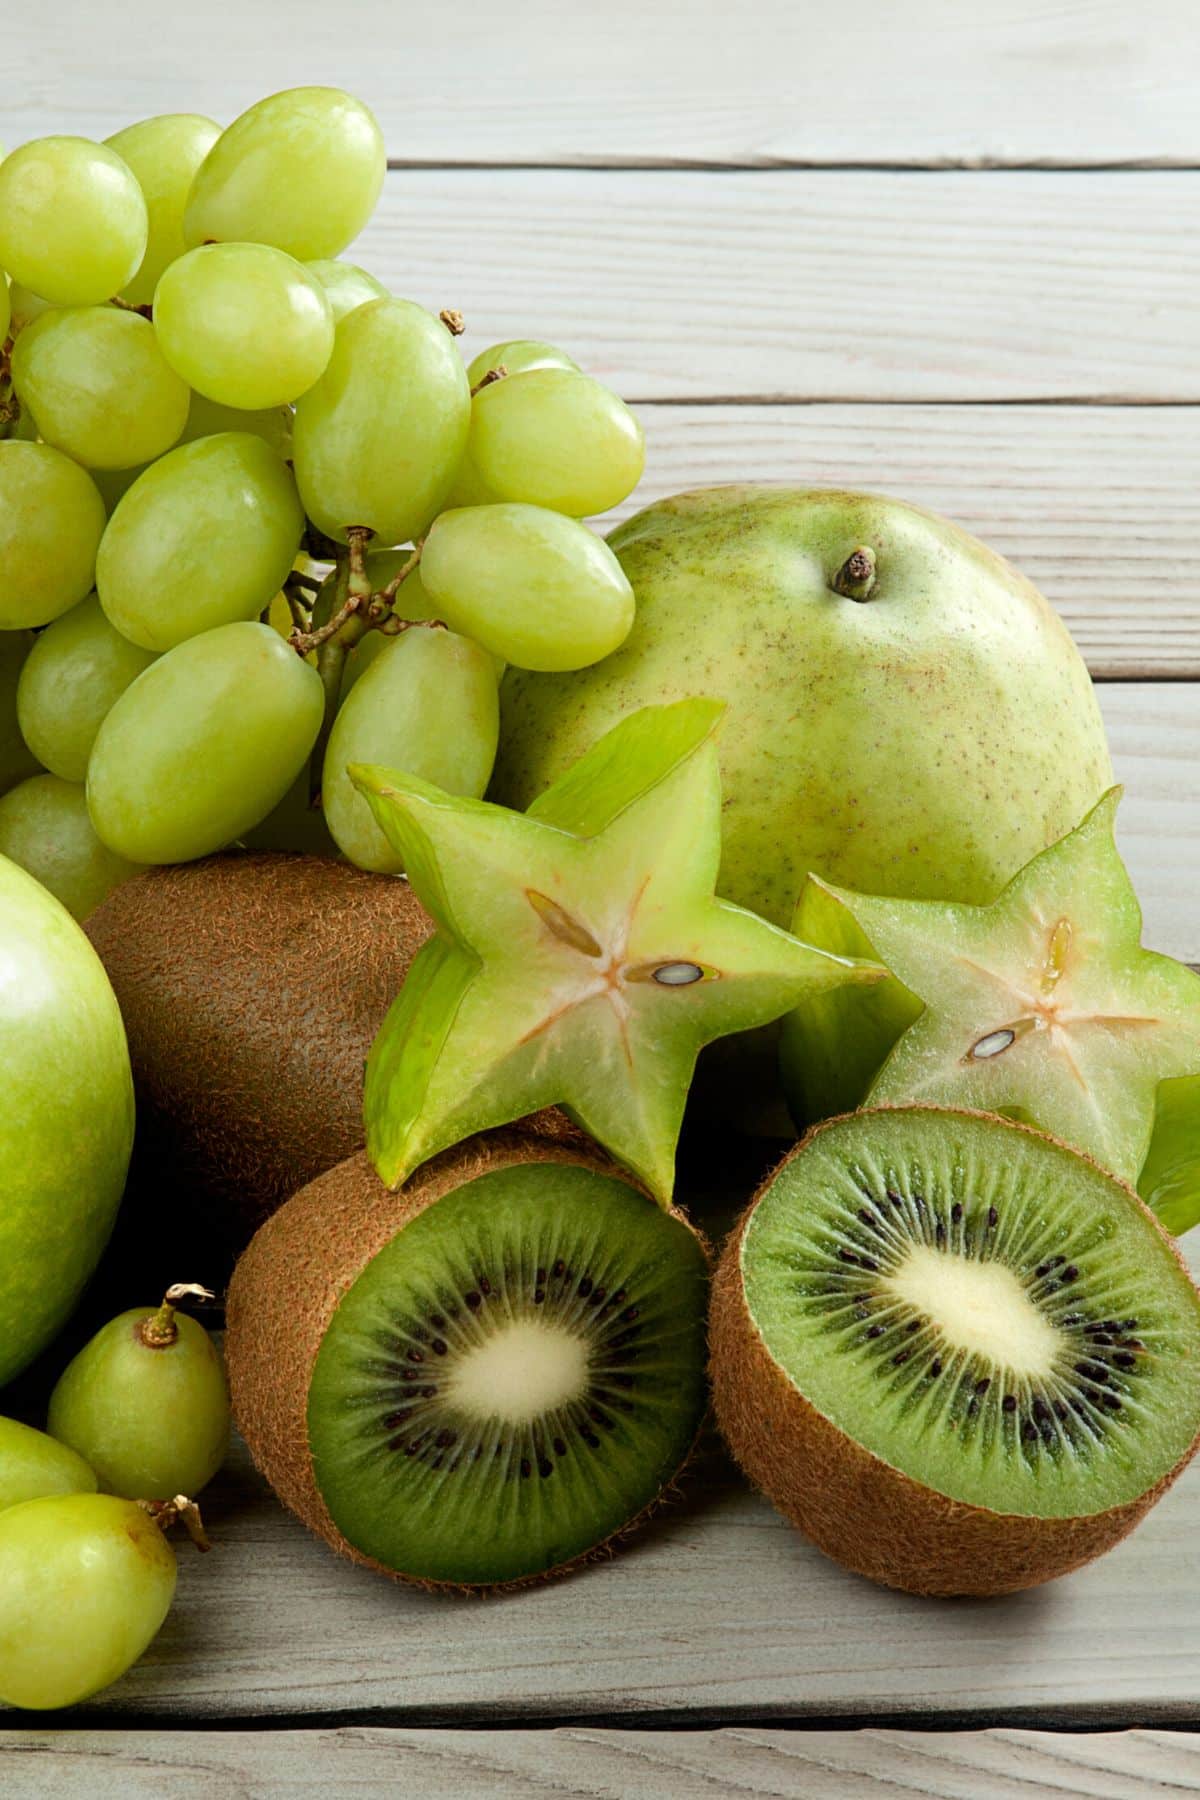 https://www.cleaneatingkitchen.com/wp-content/uploads/2022/07/green-fruits-on-a-tabletop.jpg